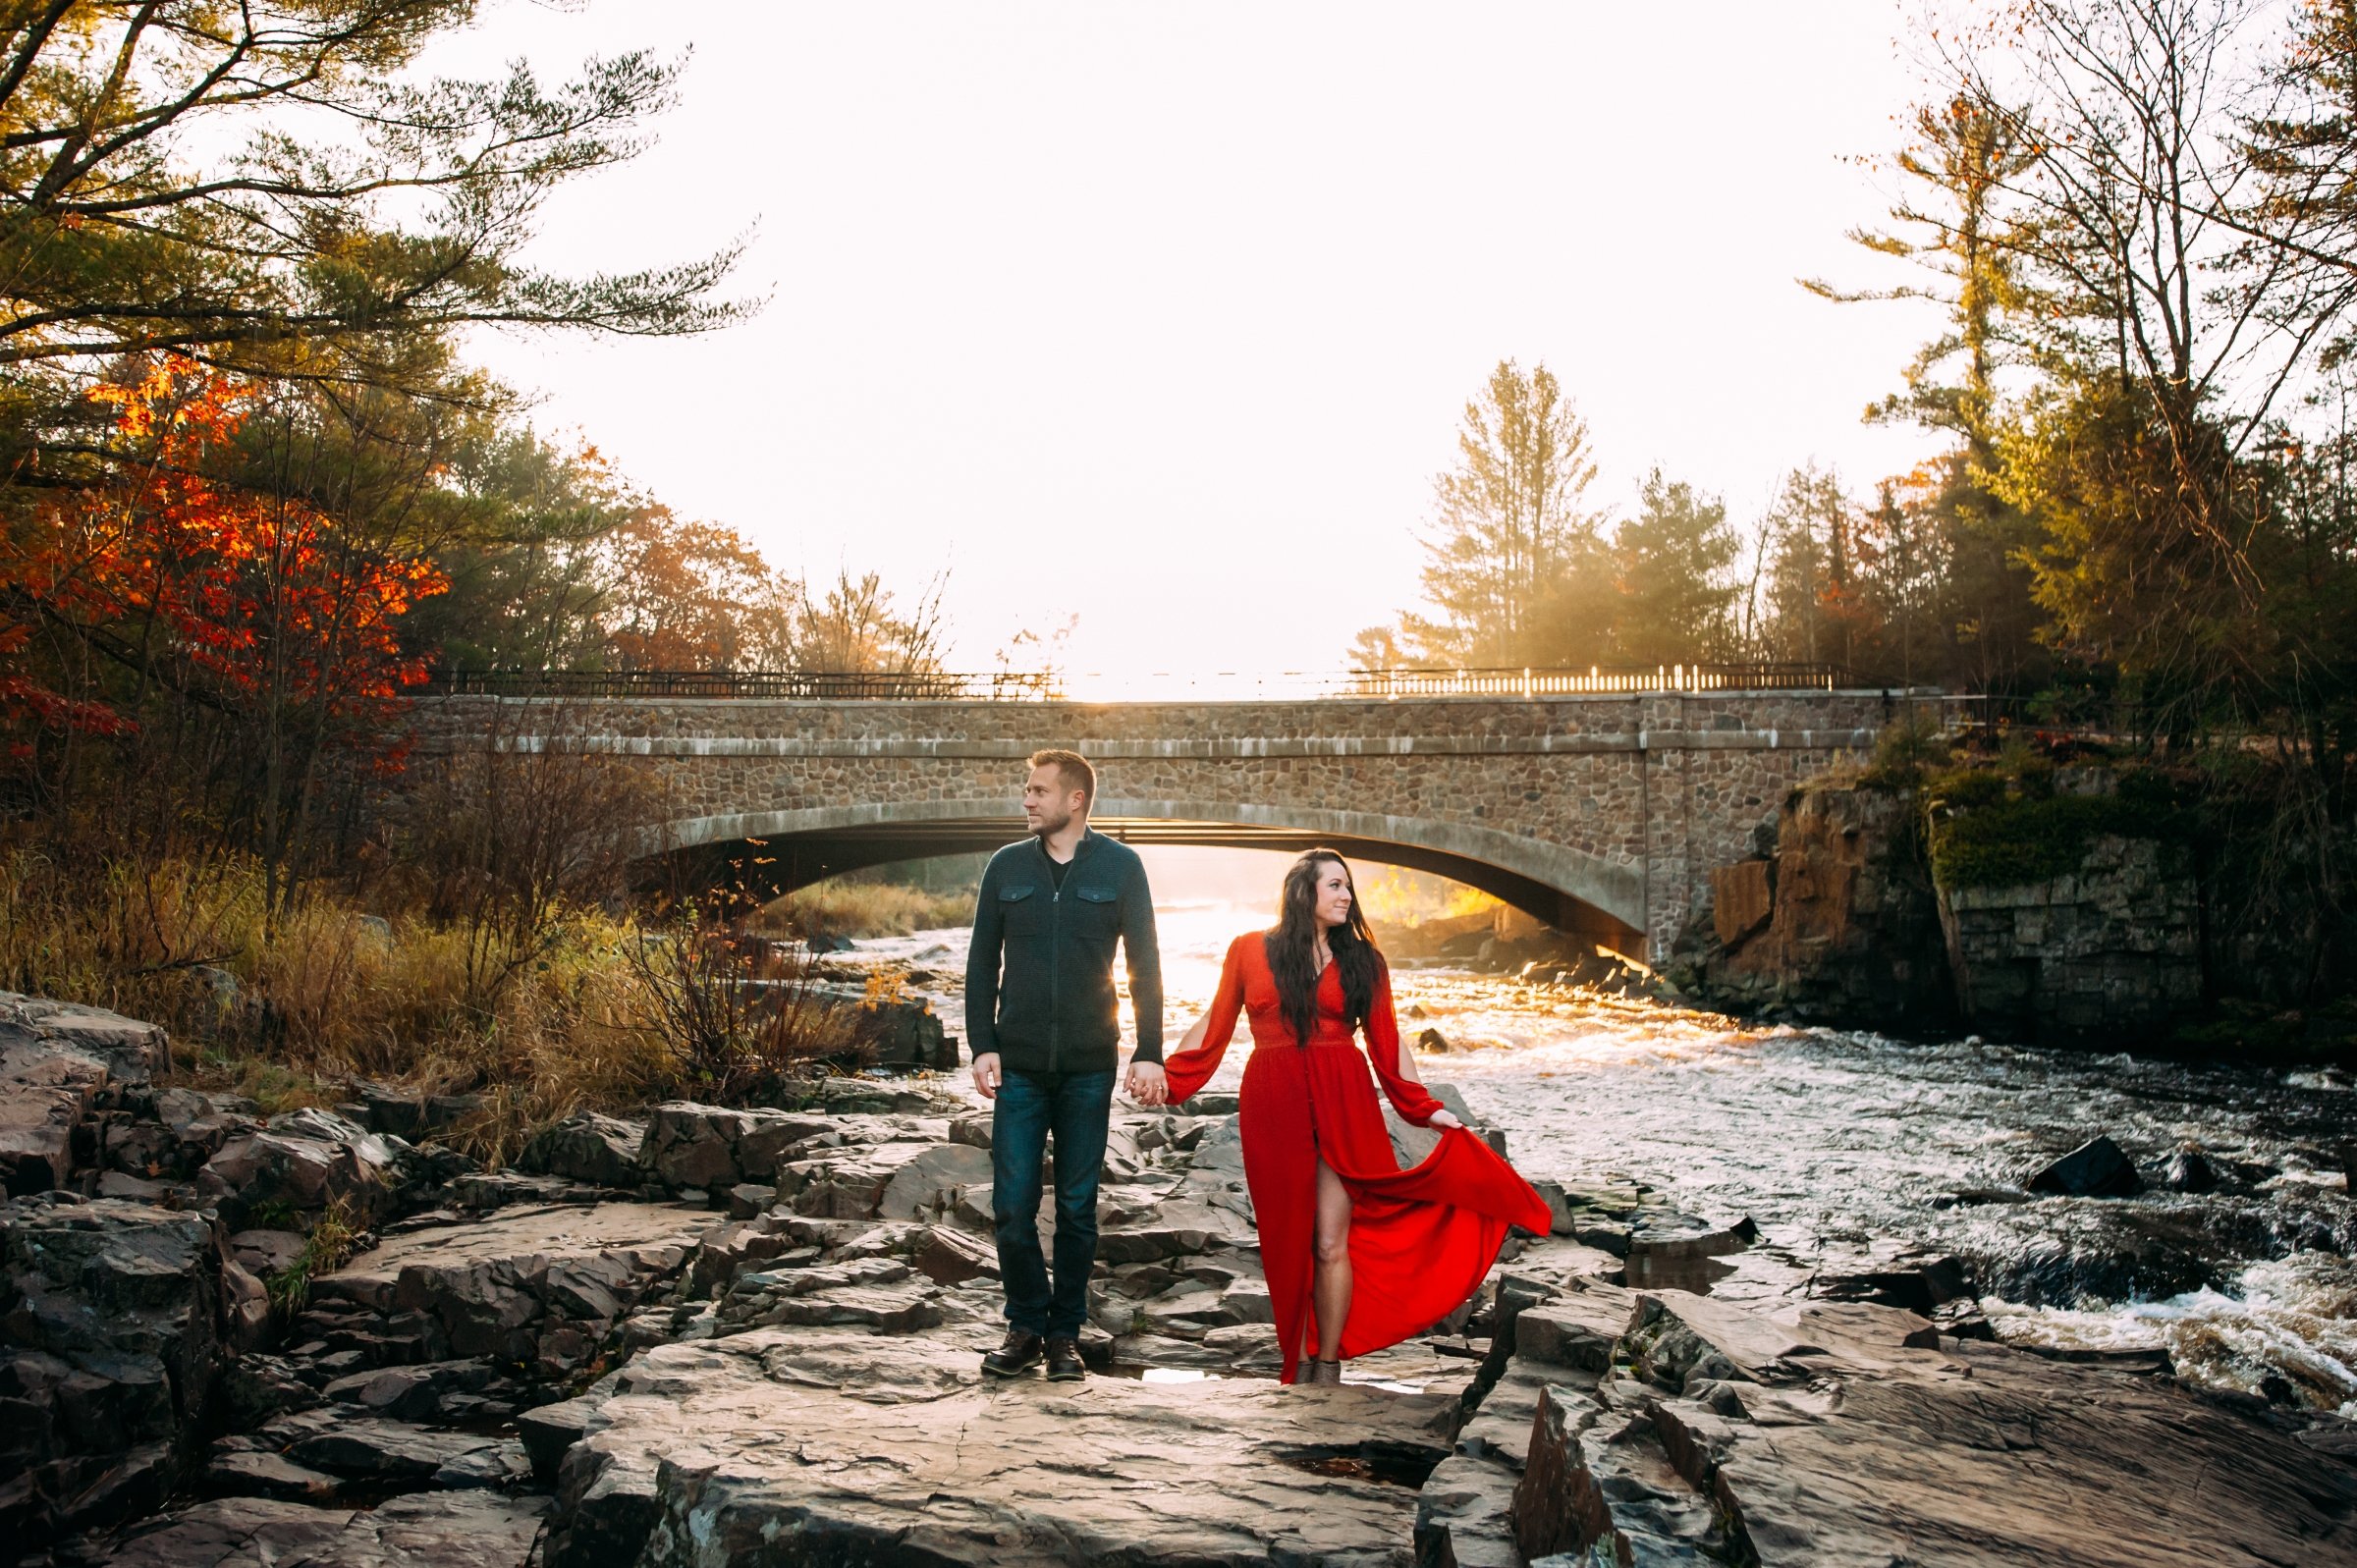 Fall photos, maternity, Wisconsin Photographer, Wausau, Green Bay, Milwaukee, Madison, Minocqua, Door County, Photoshoot Outfit Ideas, What to Wear Family Photo engagement photos (Copy)